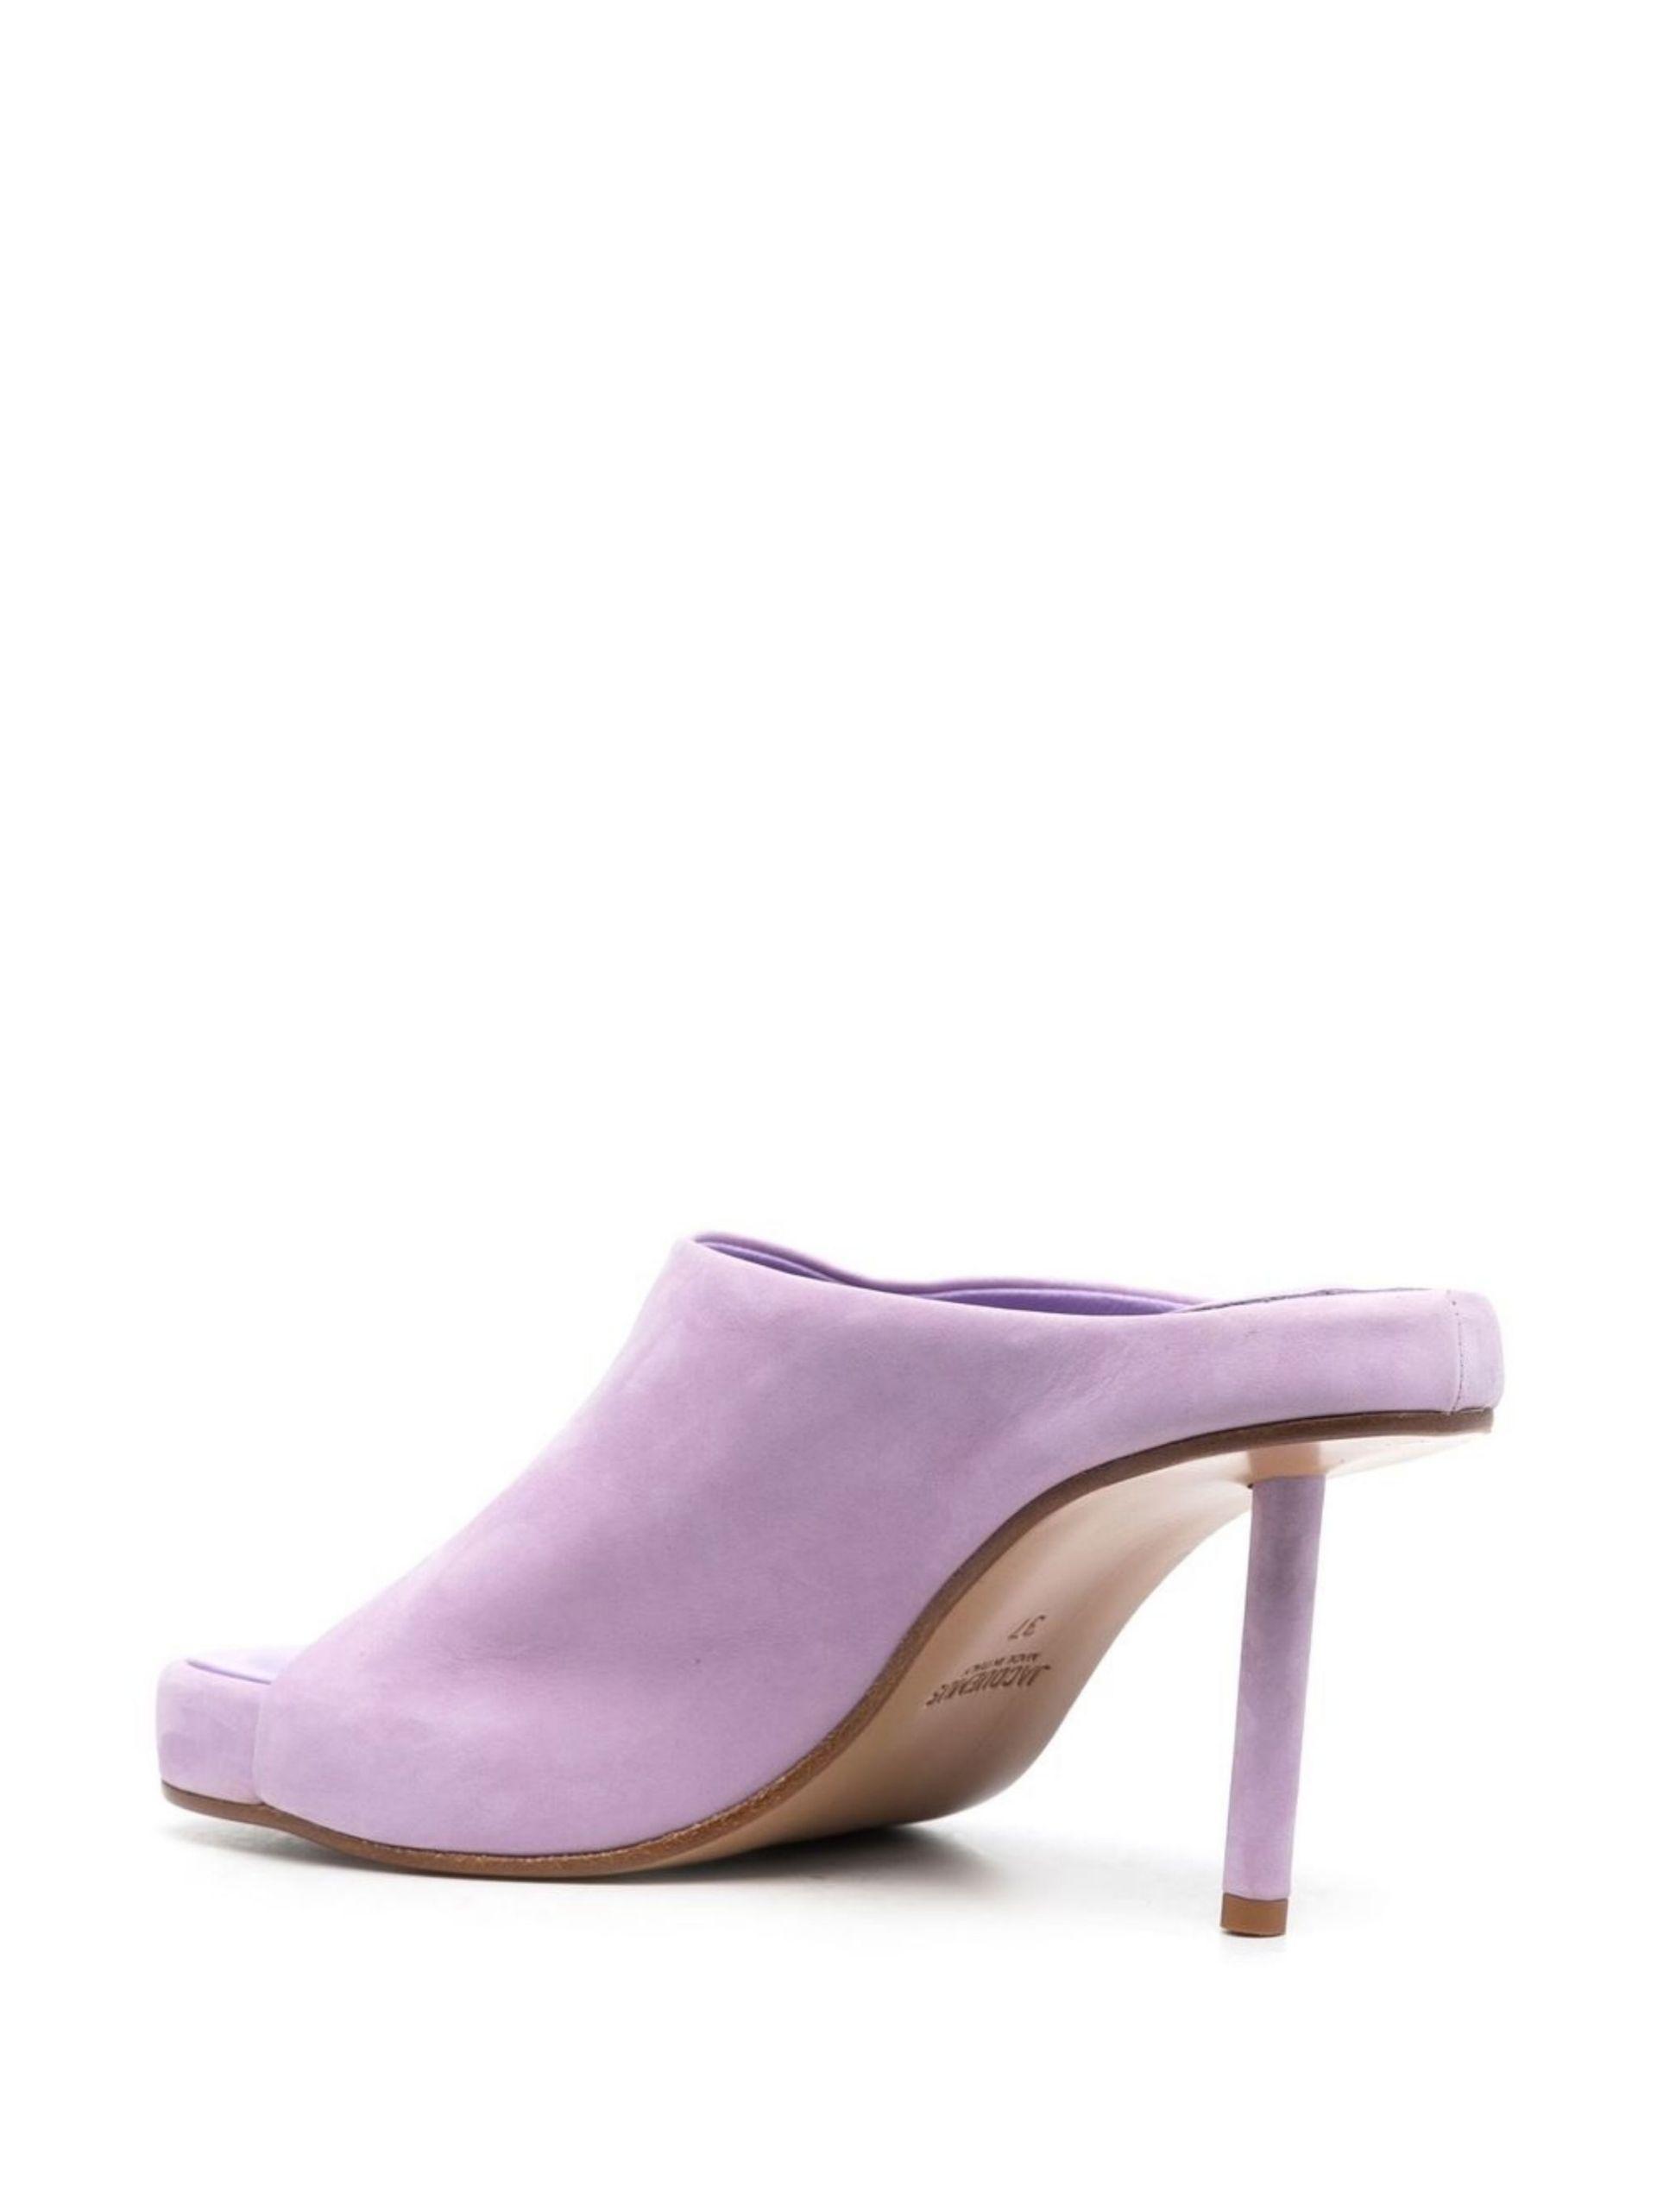 Jacquemus Purple Les Mules Nuvola 80 Suede Mules in Pink | Lyst